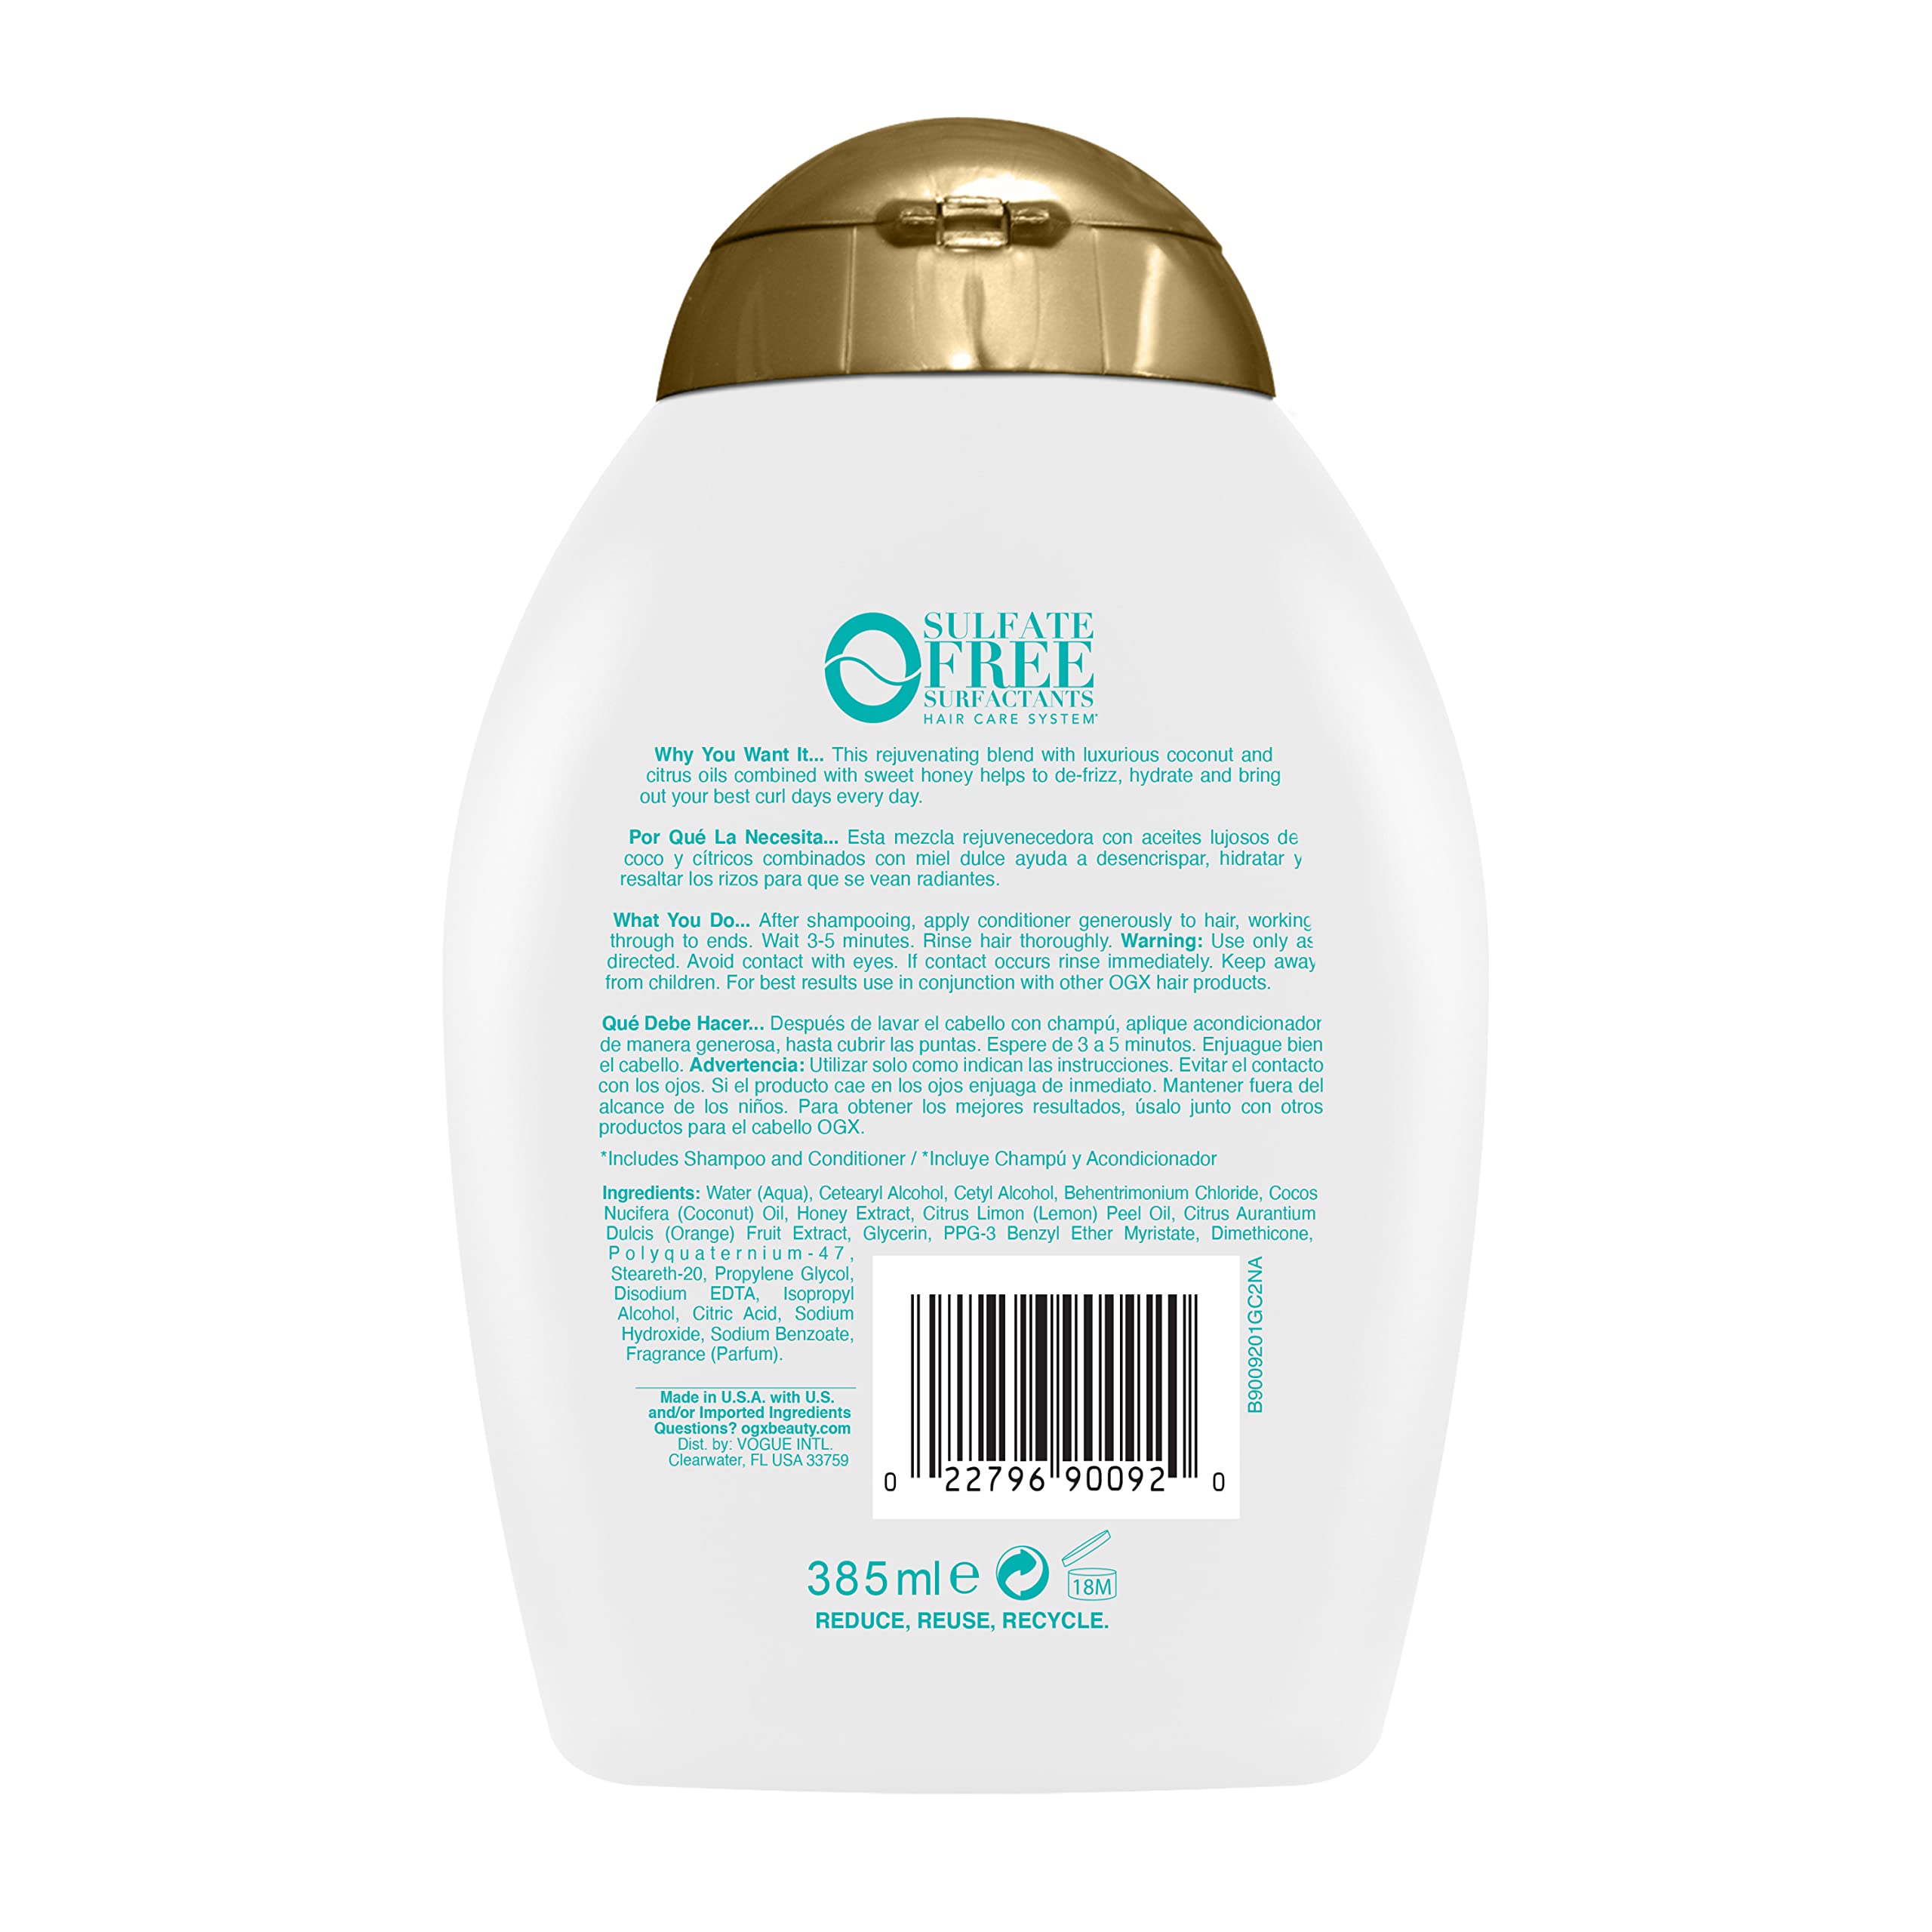 OGX Quenching + Coconut Curls Curl-Defining Conditioner, Nourishing Curly Hair Conditioner with Coconut /Citrus Oil & Honey, Paraben-Free with Sulfate-Free Surfactants, 13oz